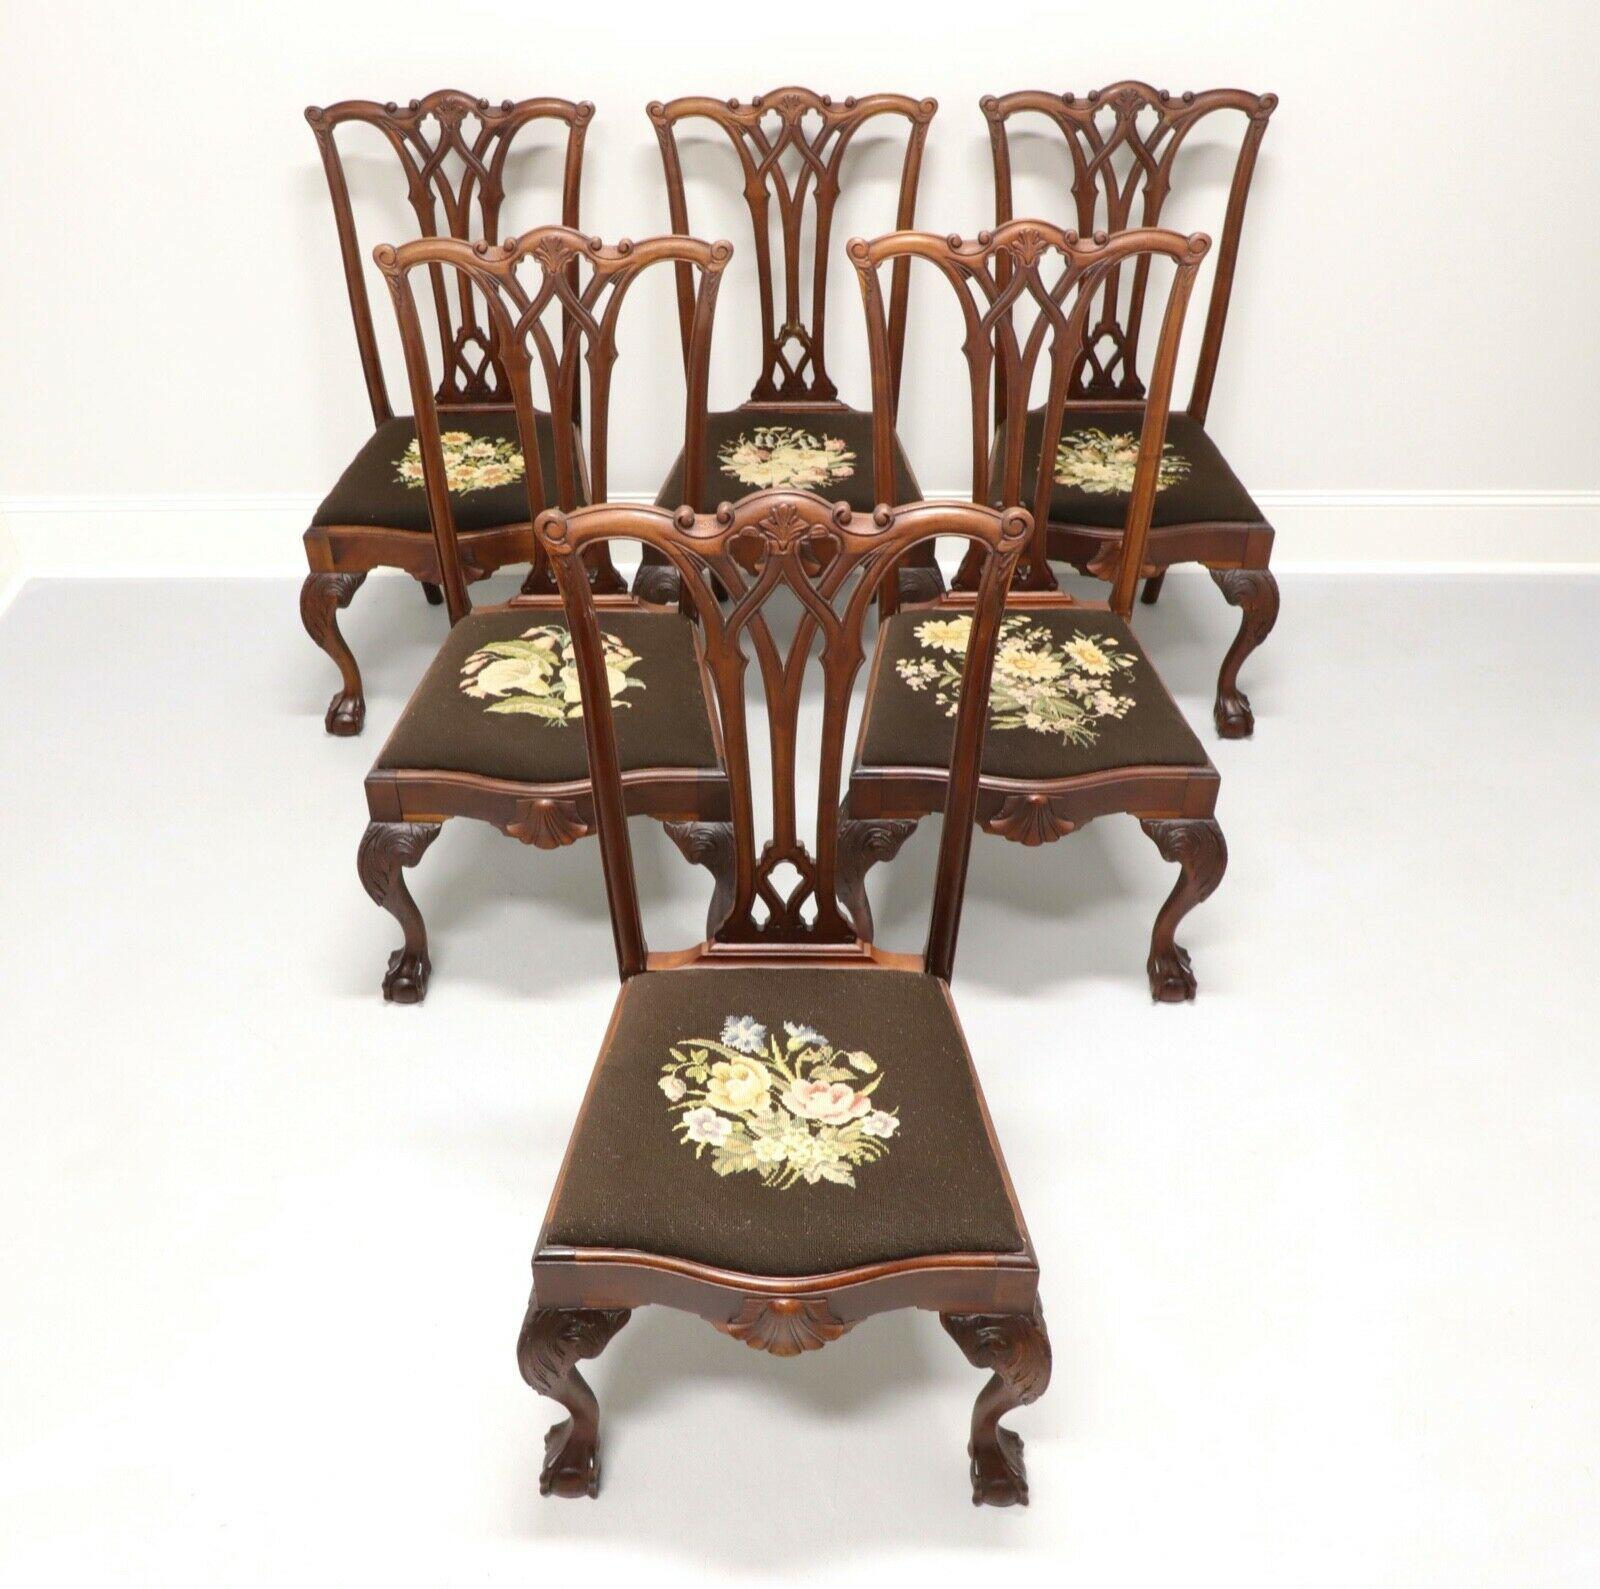 A set of six antique mahogany dining side chairs in the Chippendale style, unbranded. Carved backs, varying floral motif needlepoint seats, carved knees, ball and claw feet. Likely made in the USA, in the late 19th Century.

Measures: Overall: 22.5w